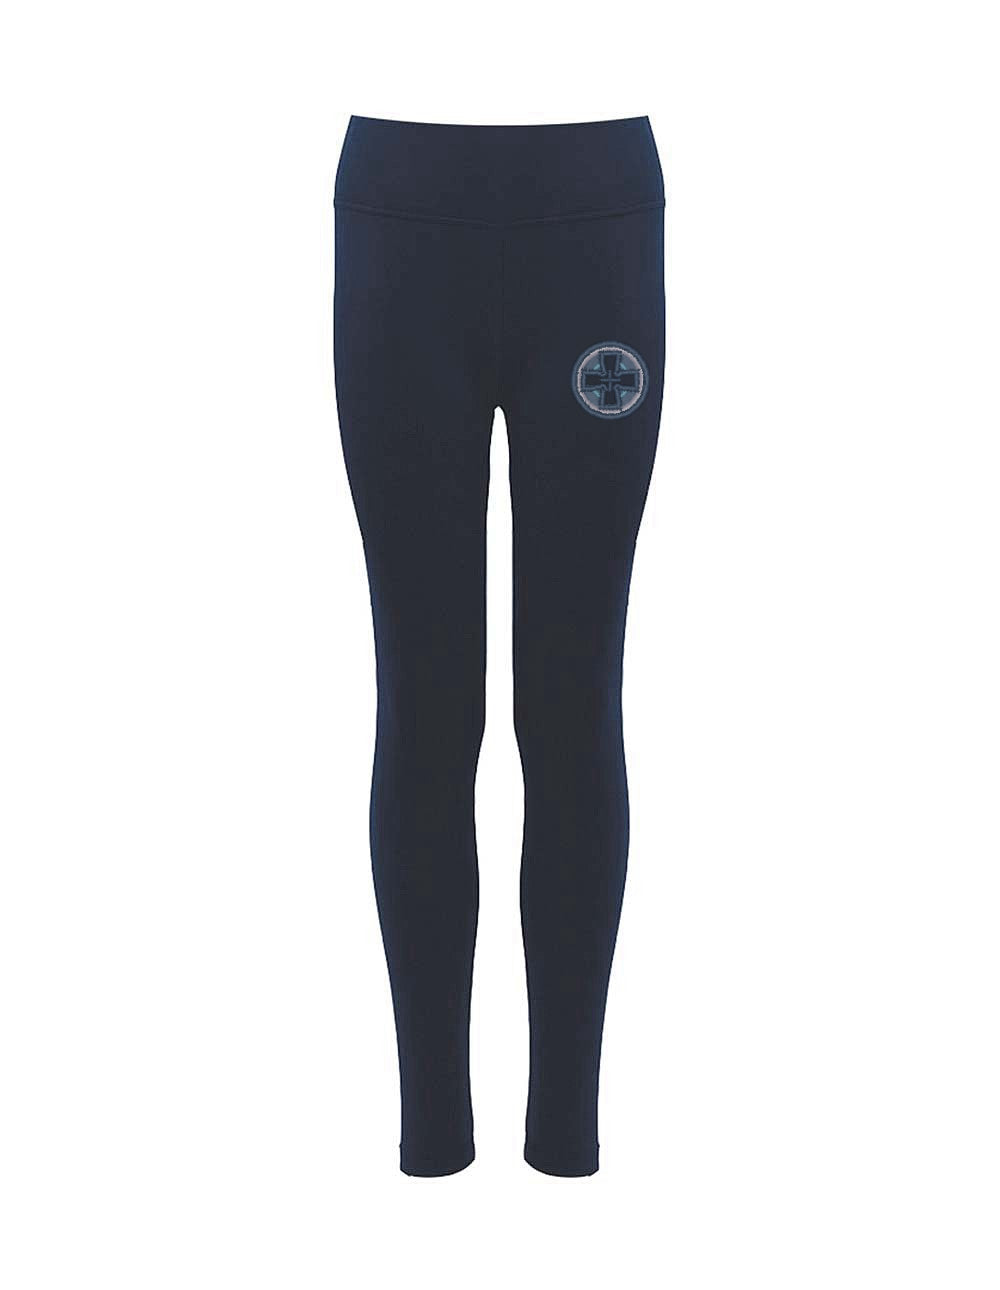 Our Lady & St. Bede Navy Sport Leggings